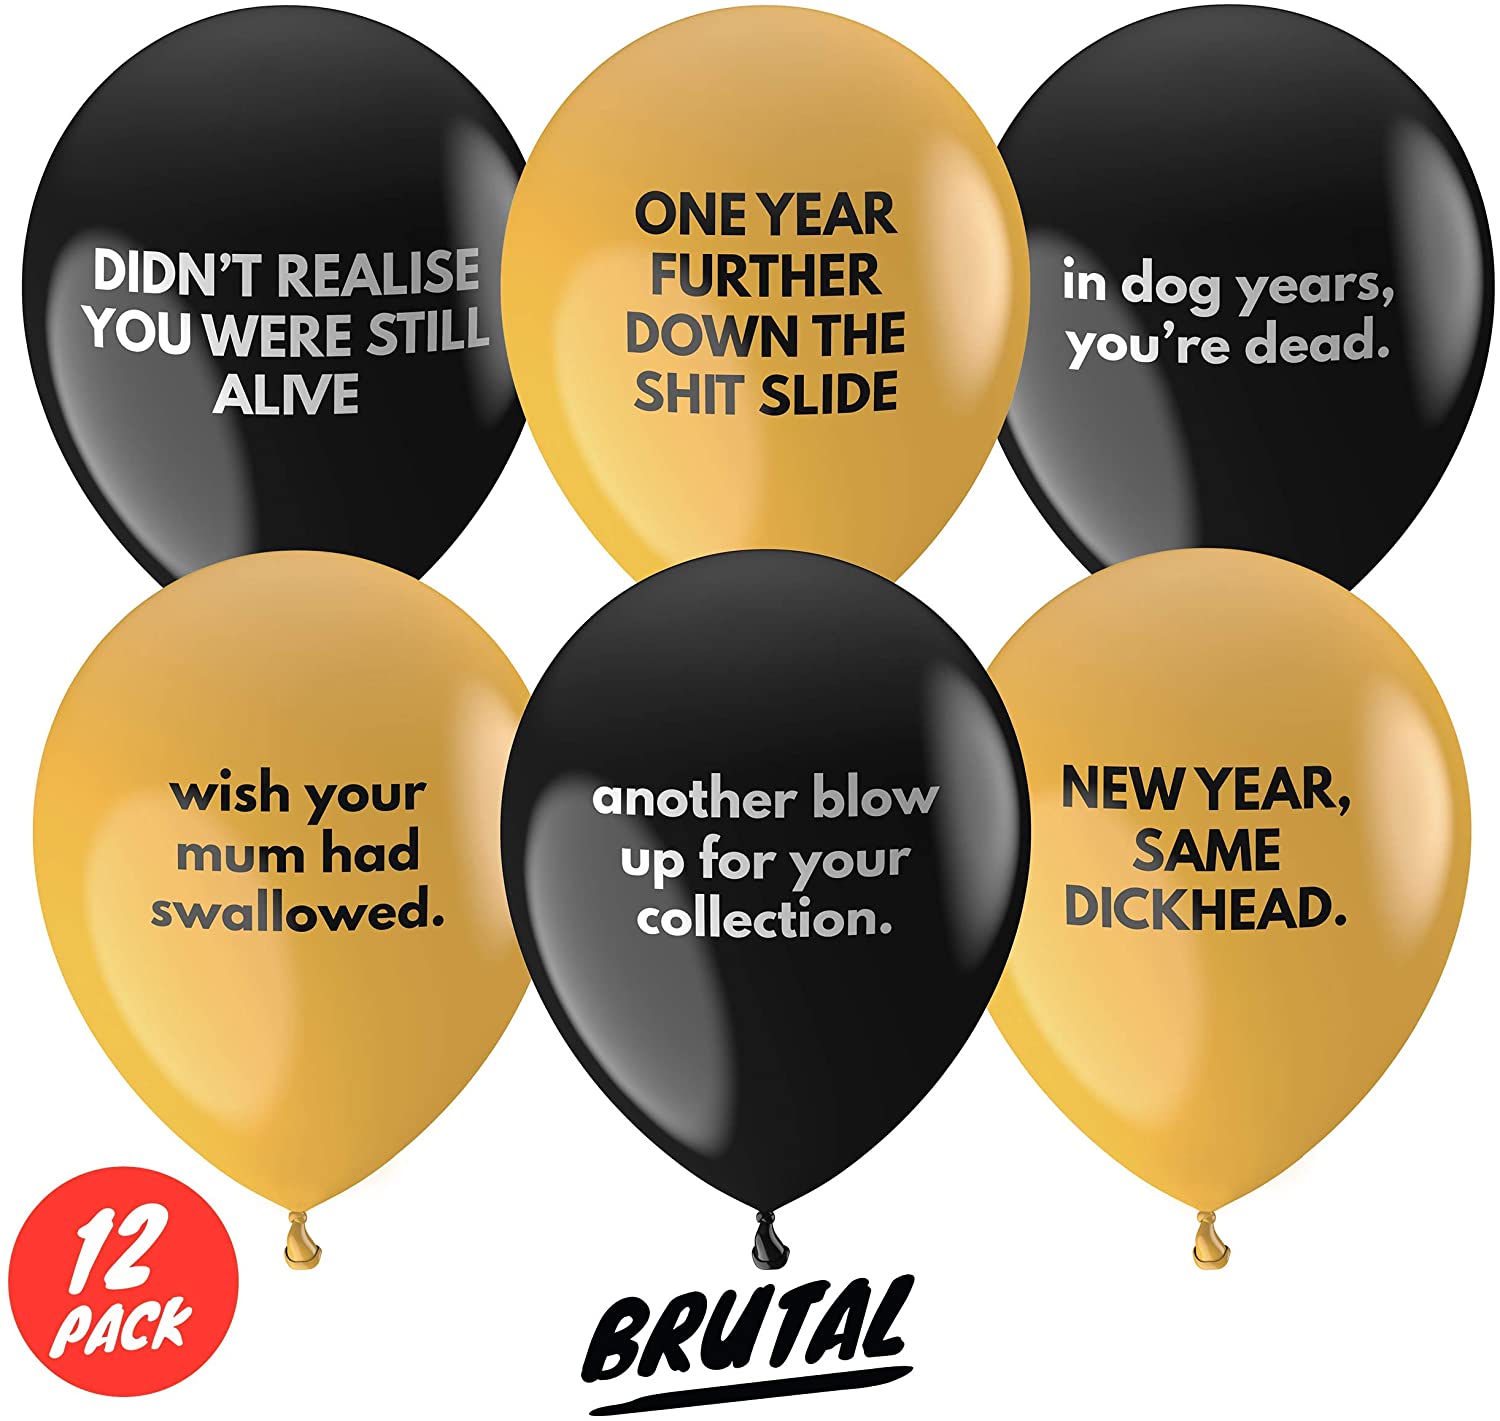 Brutal Balloons Abusive Balloons 12 Pack Funny Rude And Slightly Offensive Joke Birthday 